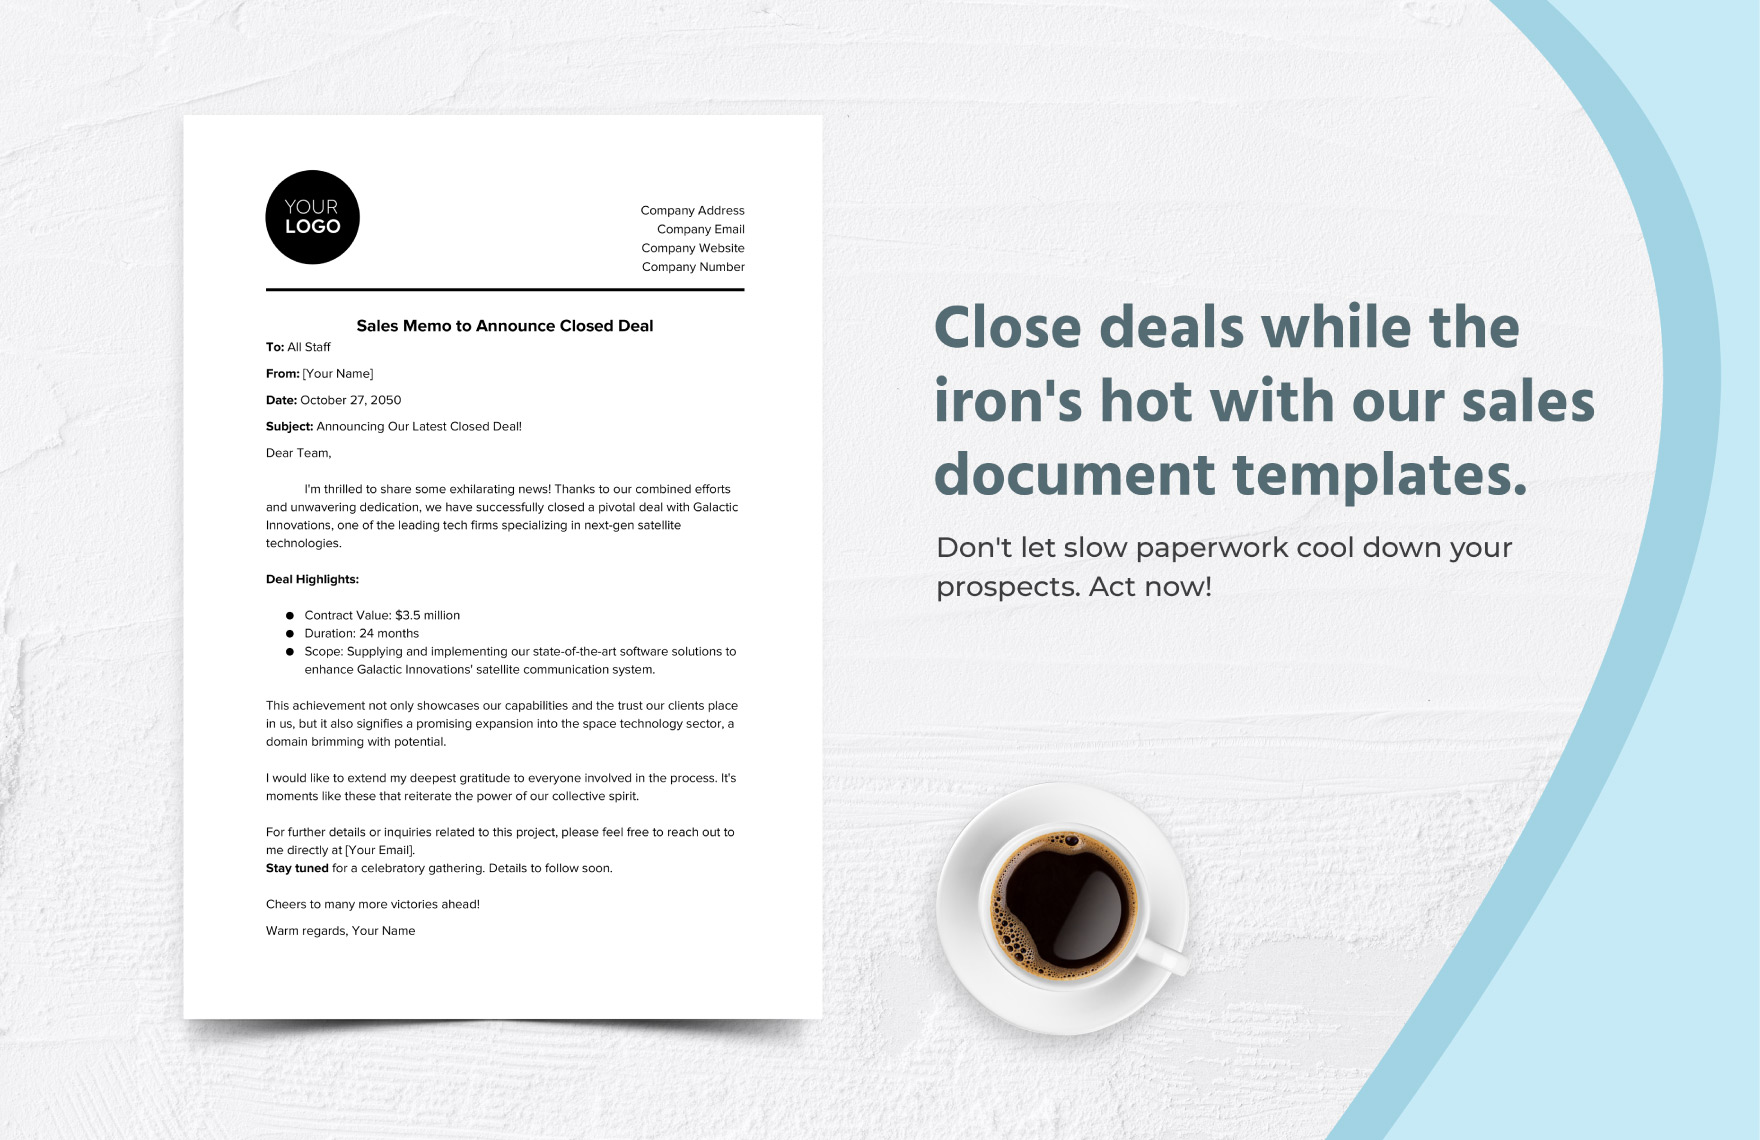 Sales Memo to Announce Closed Deal Template